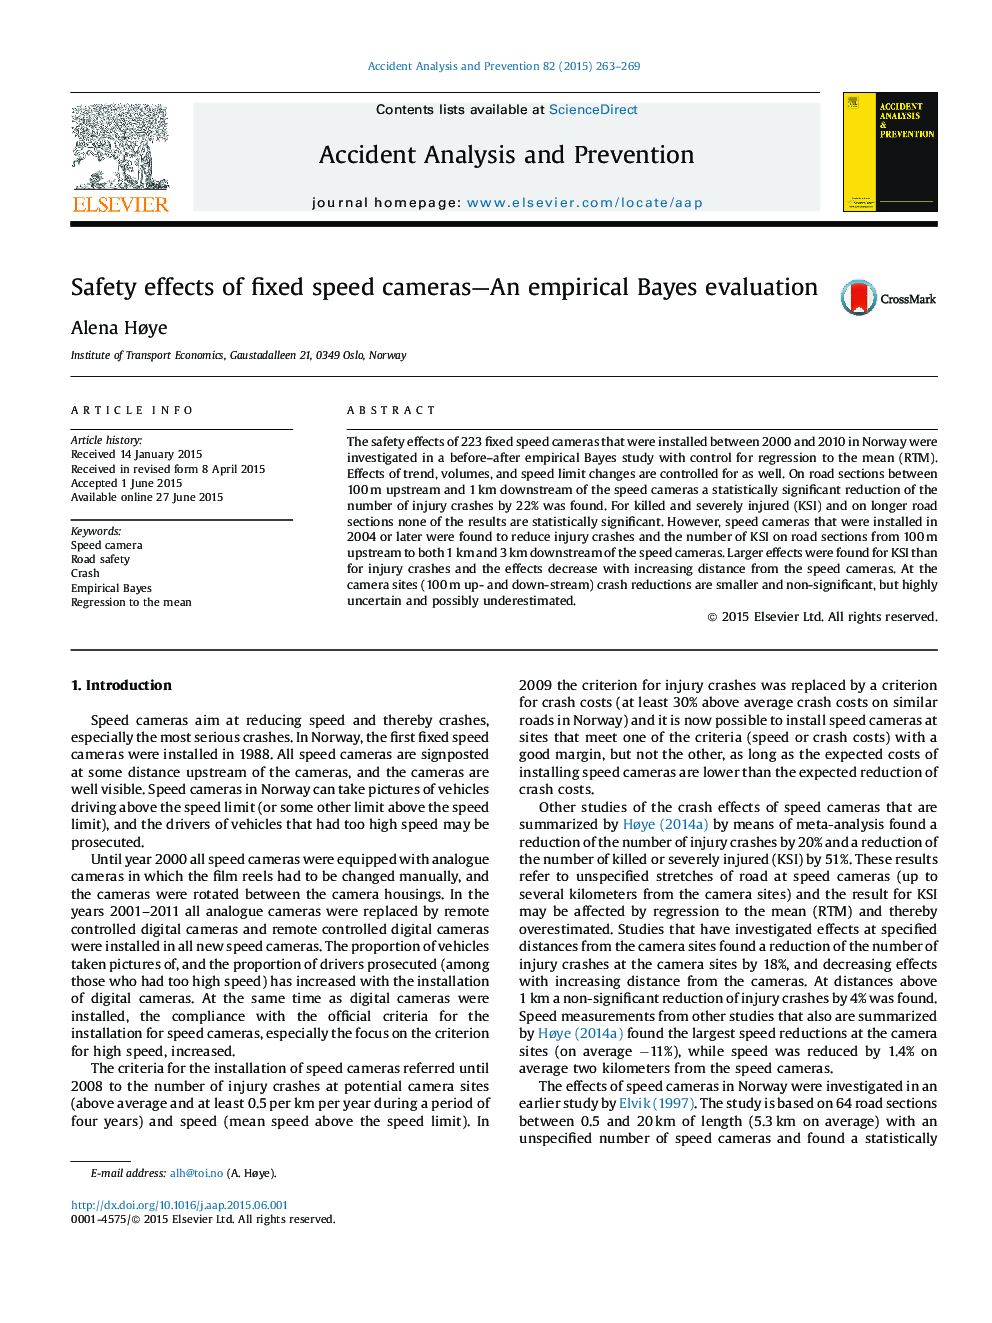 Safety effects of fixed speed cameras-An empirical Bayes evaluation